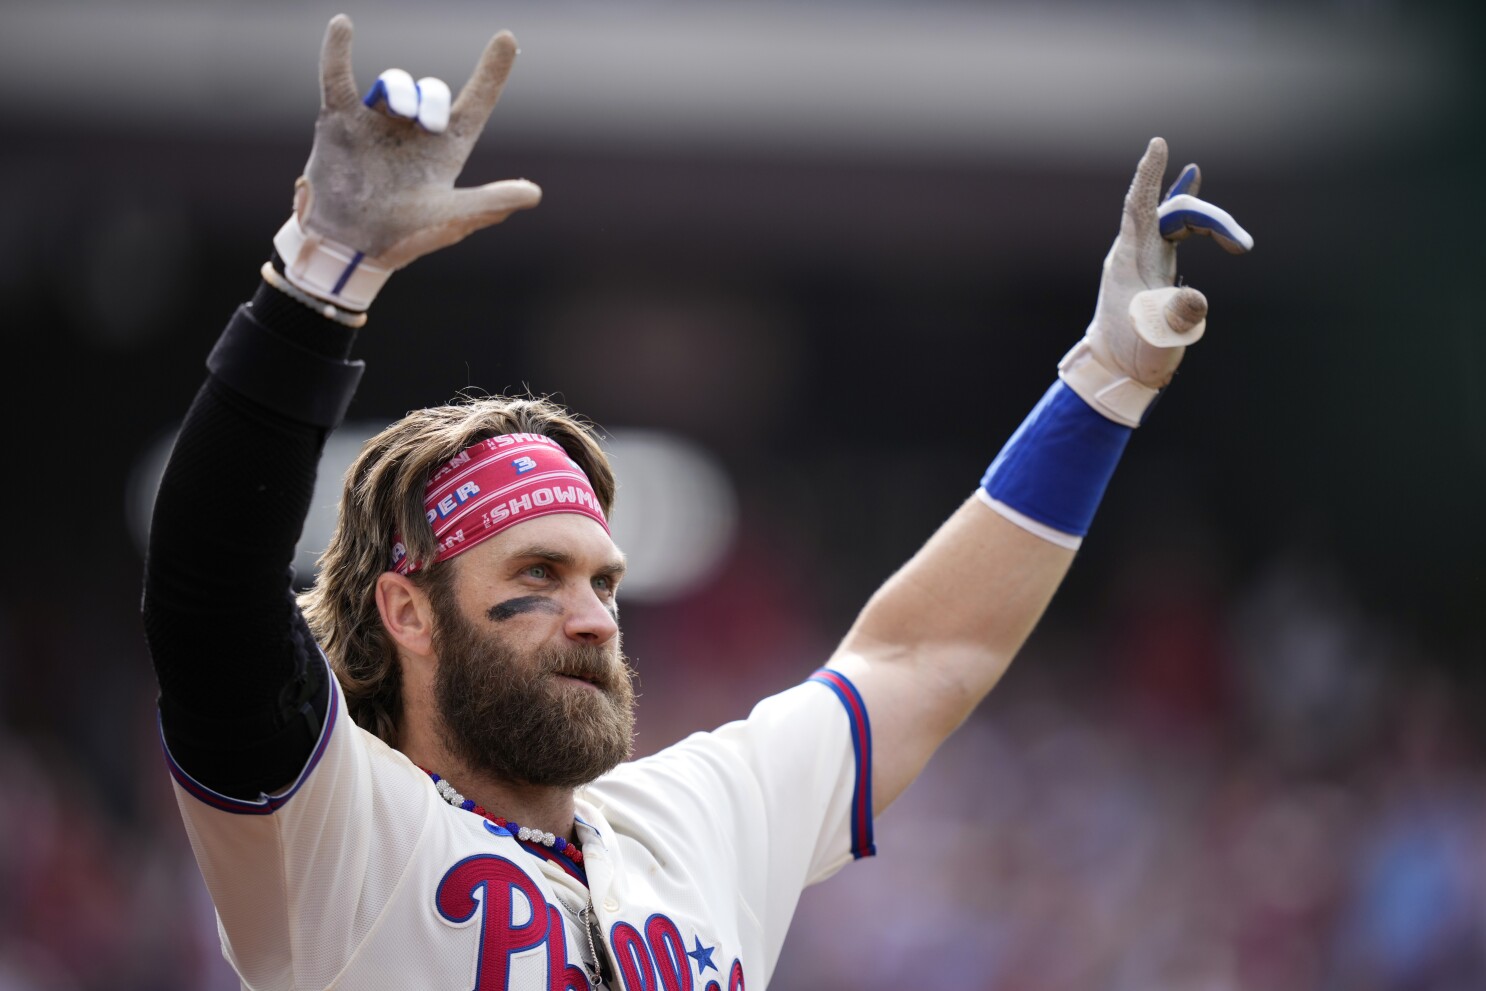 Bryce Harper doubles in debut with Washington, but Dodgers and